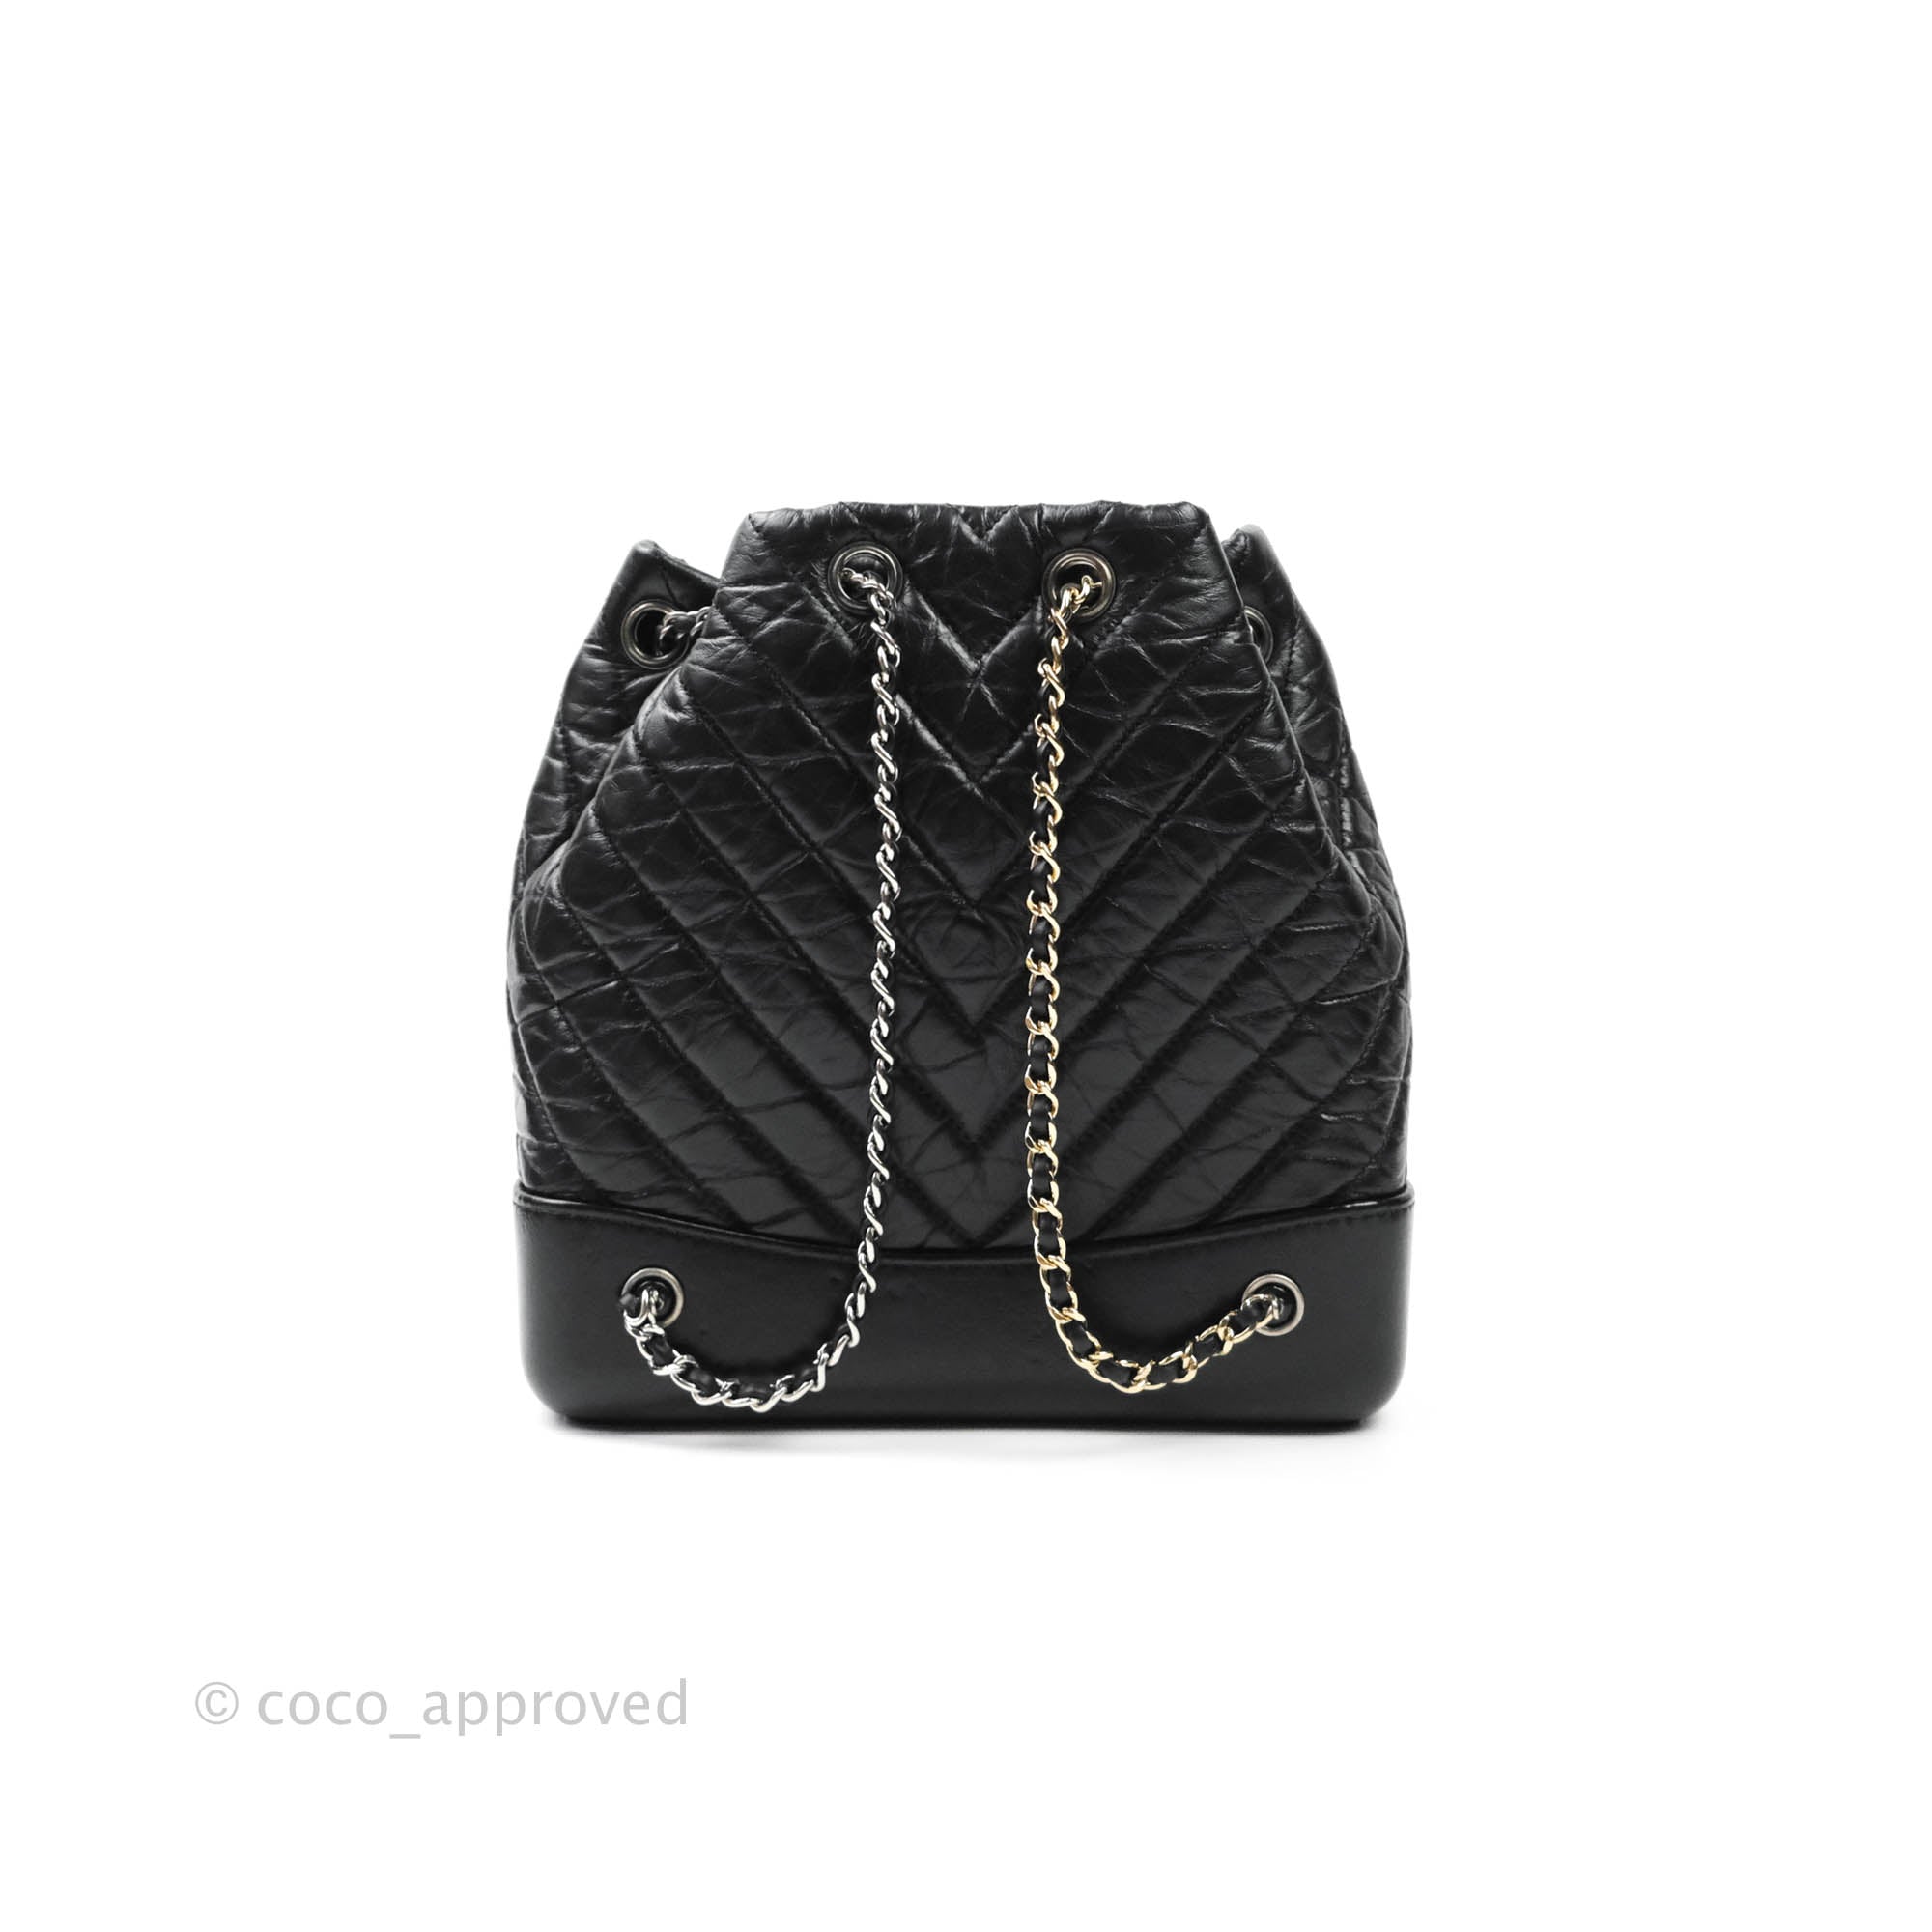 Chanel Black Quilted Leather Small Gabrielle Backpack Chanel